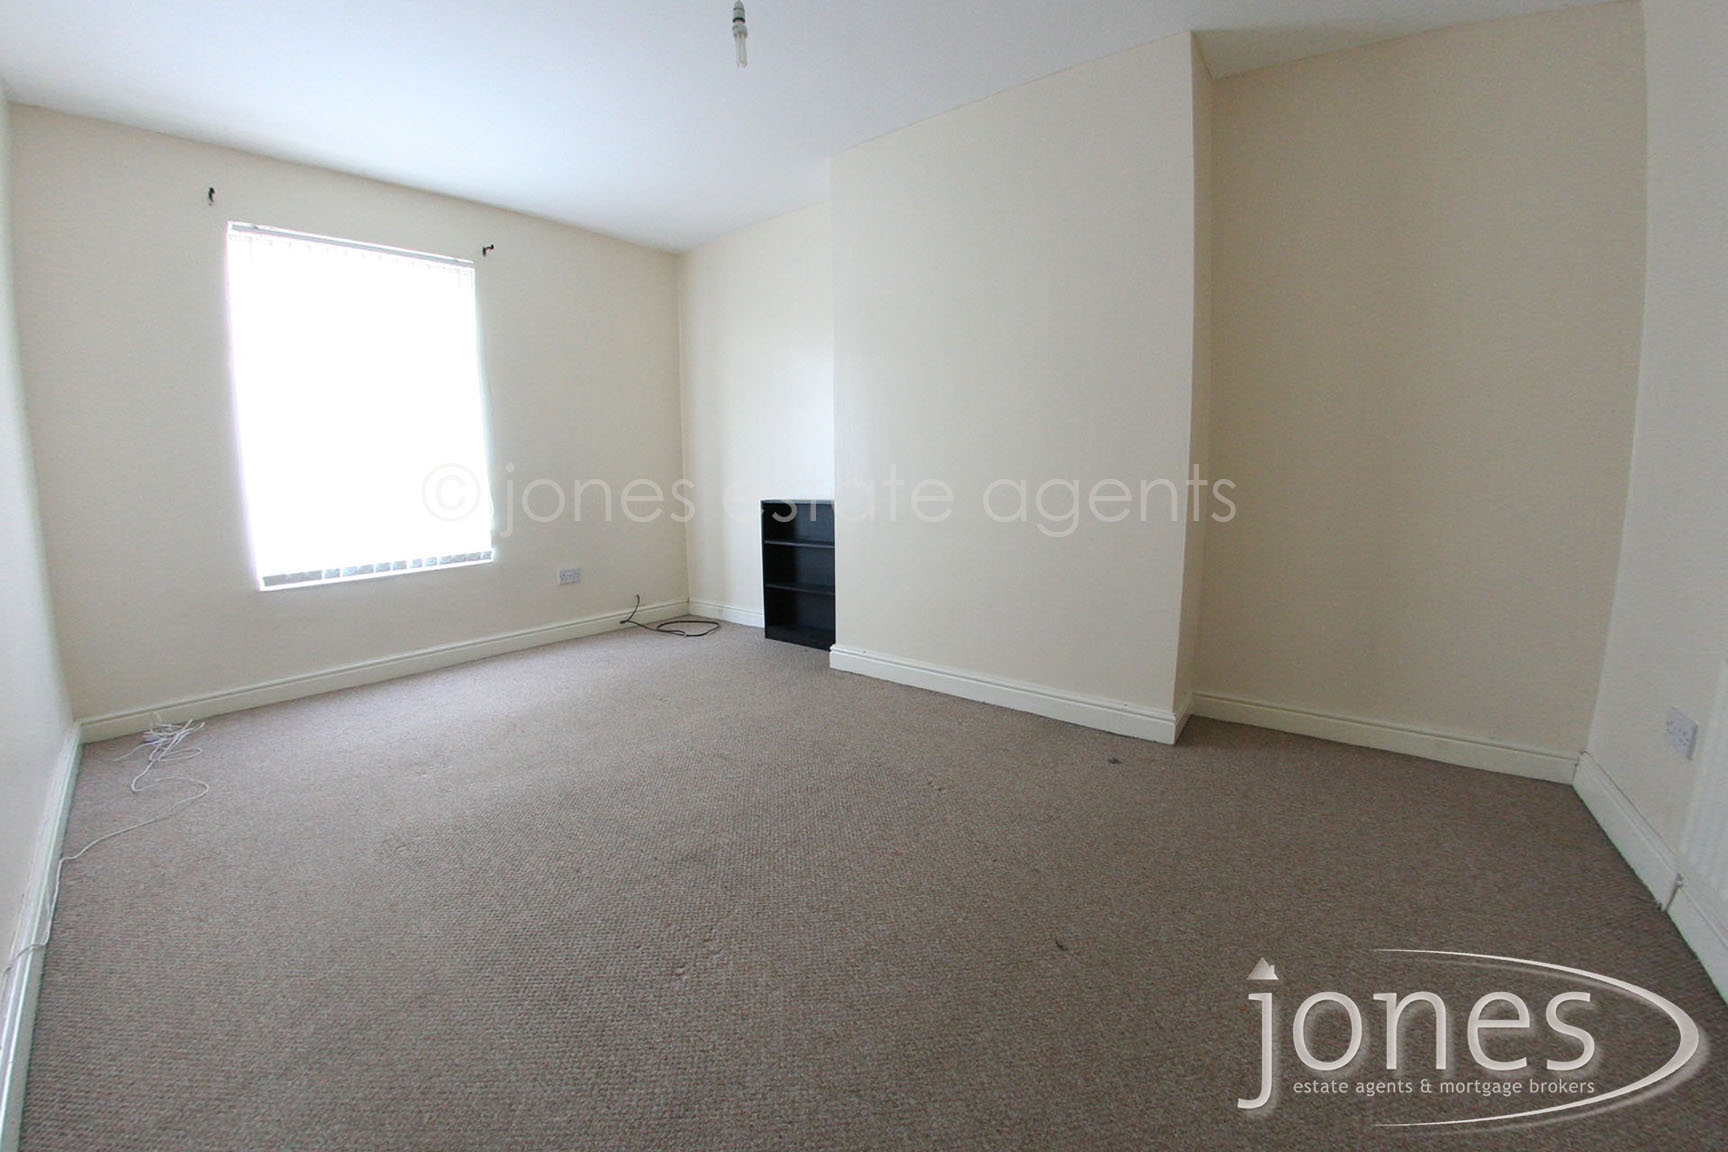 Home for Sale Let - Photo 05 North Road West,Wingate,TS28 5AP